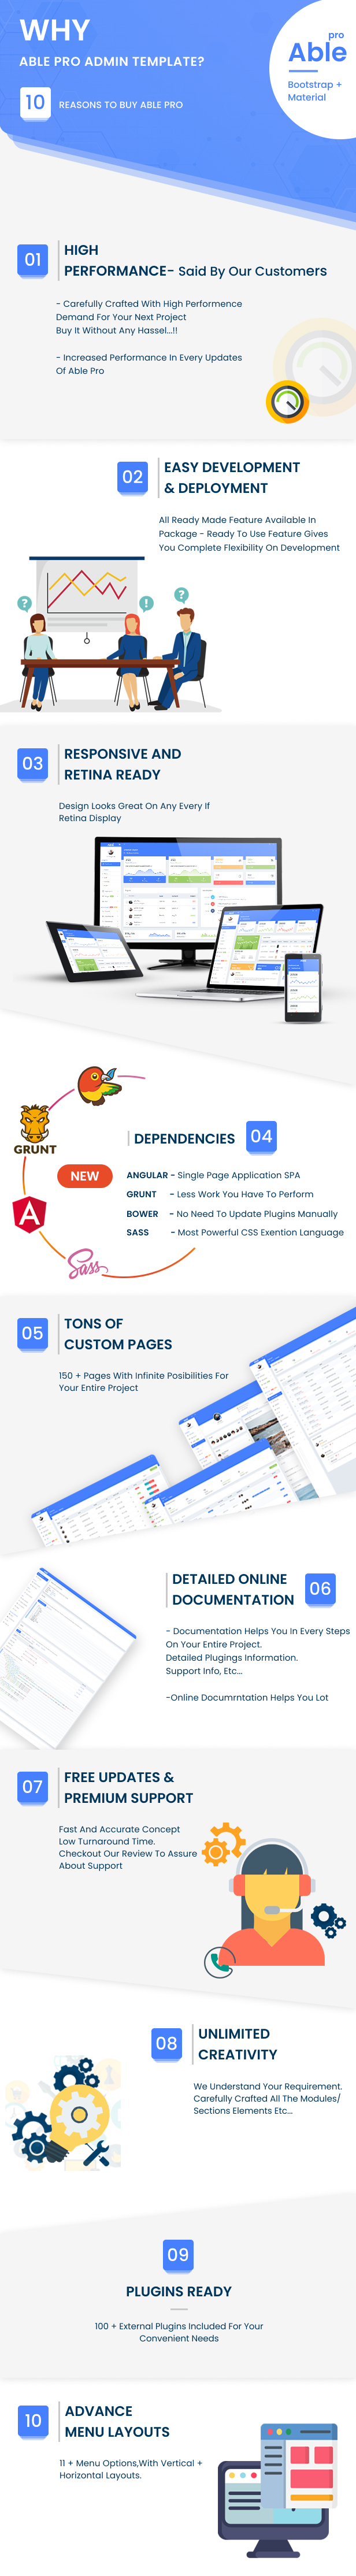 able pro admin template